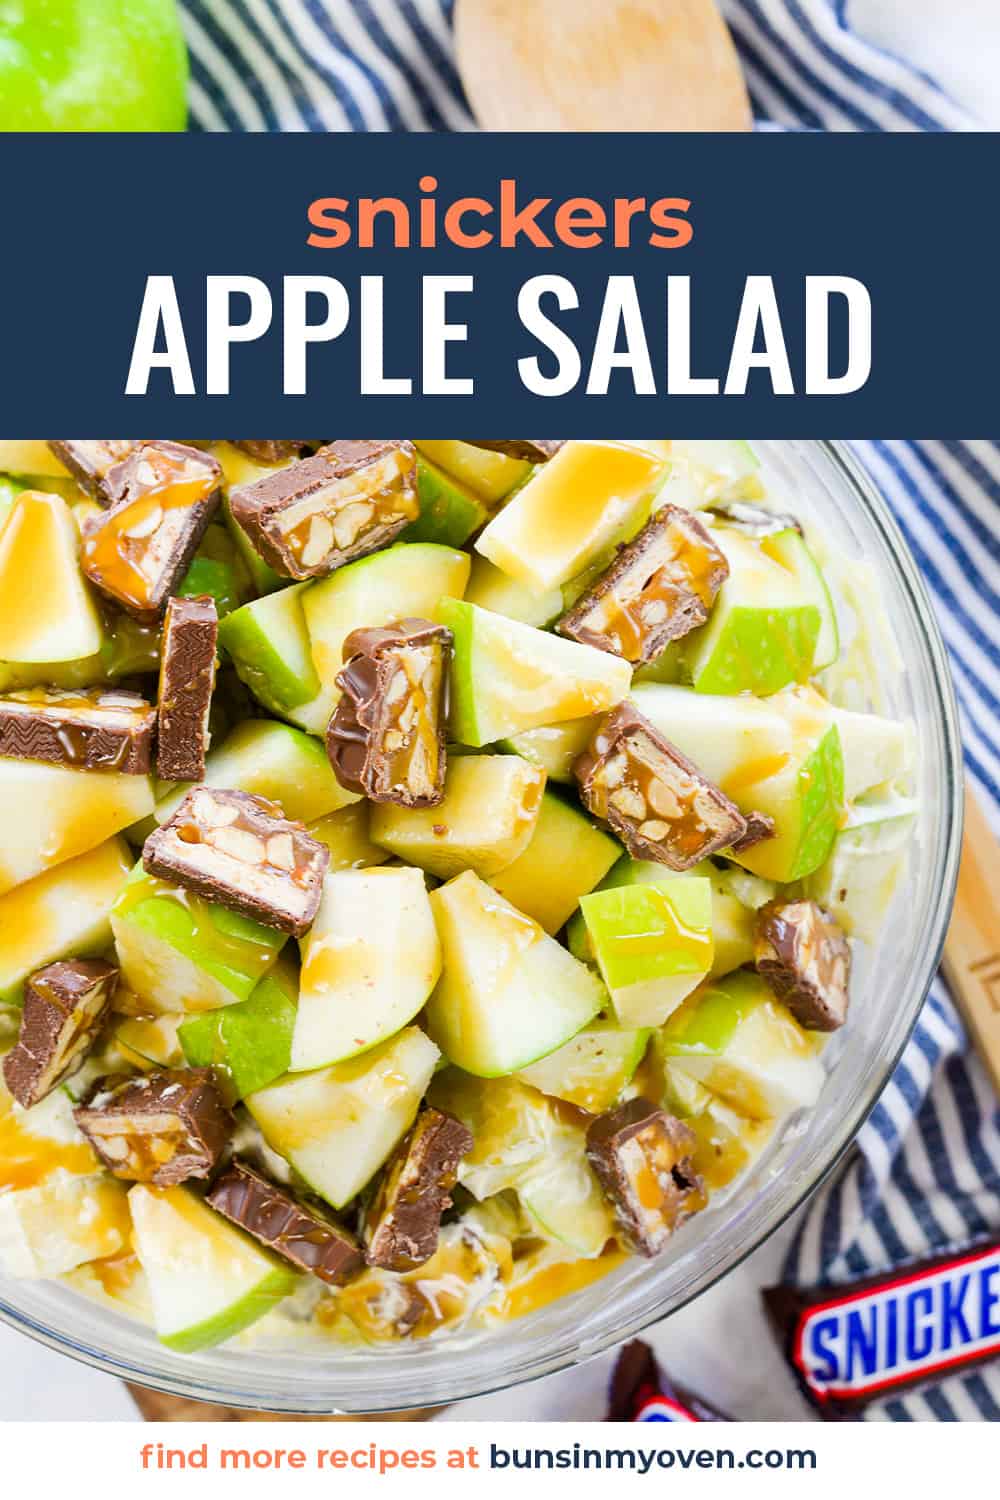 Snickers apple salad in glass bowl.